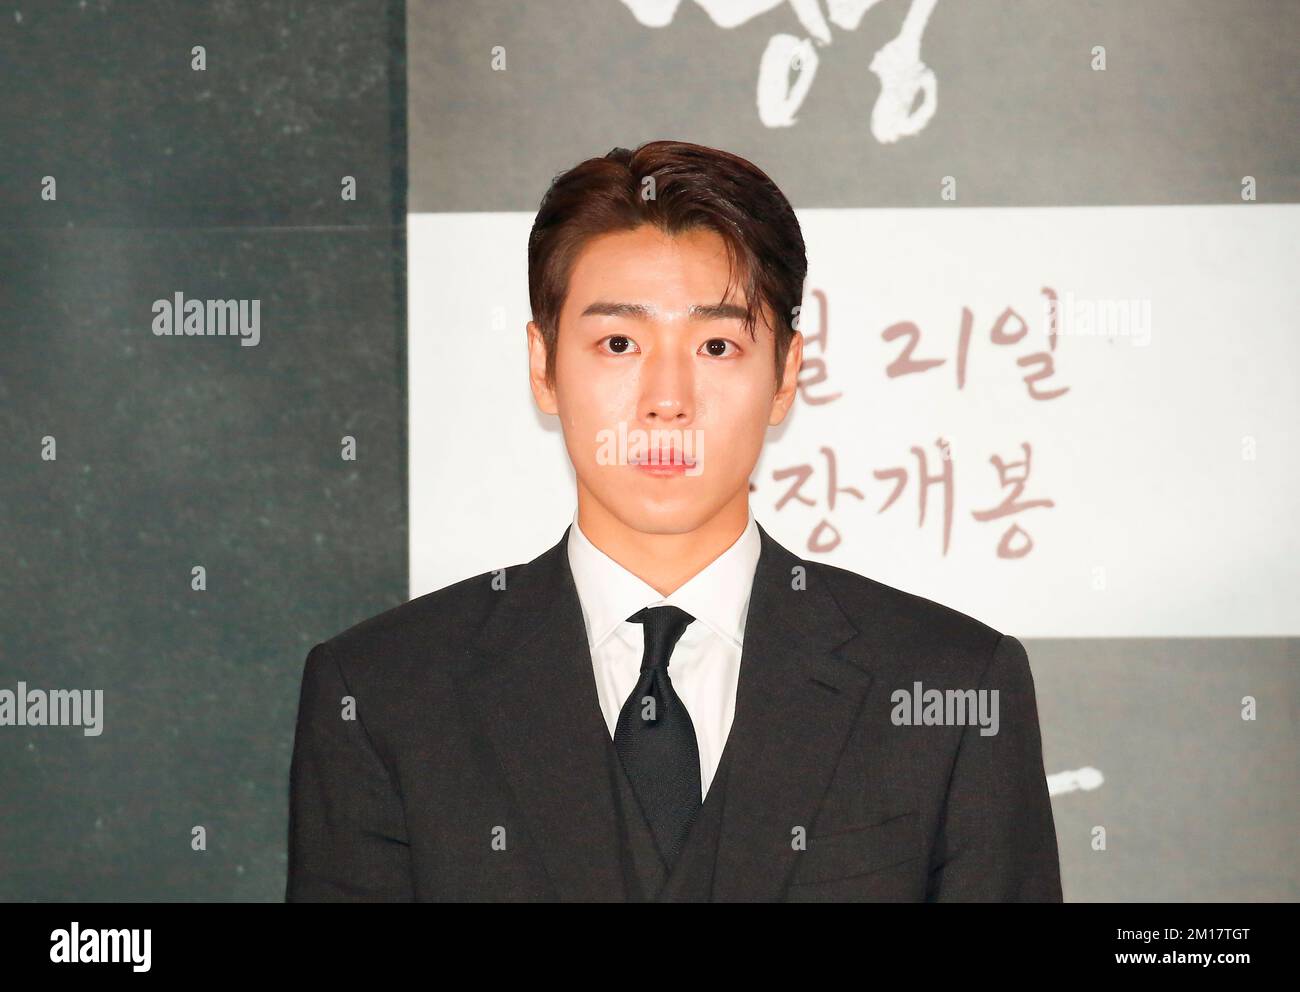 Lee Hyun-Woo, Dec 8, 2022 : South Korean actor Lee Hyun-Woo attends a press conference after a press preview of the movie 'Hero' in Seoul, South Korea. The upcoming South Korean musical drama film is about Korean independence fighter Ahn Jung-Geun (1879-1910) who assassinated on October 26, 1909, Ito Hirobumi, Japan's first prime minister and resident-general of Korea at Harbin station in northern China. Ahn was executed at the age of 31 in March 1910. Japan colonised Korea from 1910 to 1945. Credit: Lee Jae-Won/AFLO/Alamy Live News Stock Photo